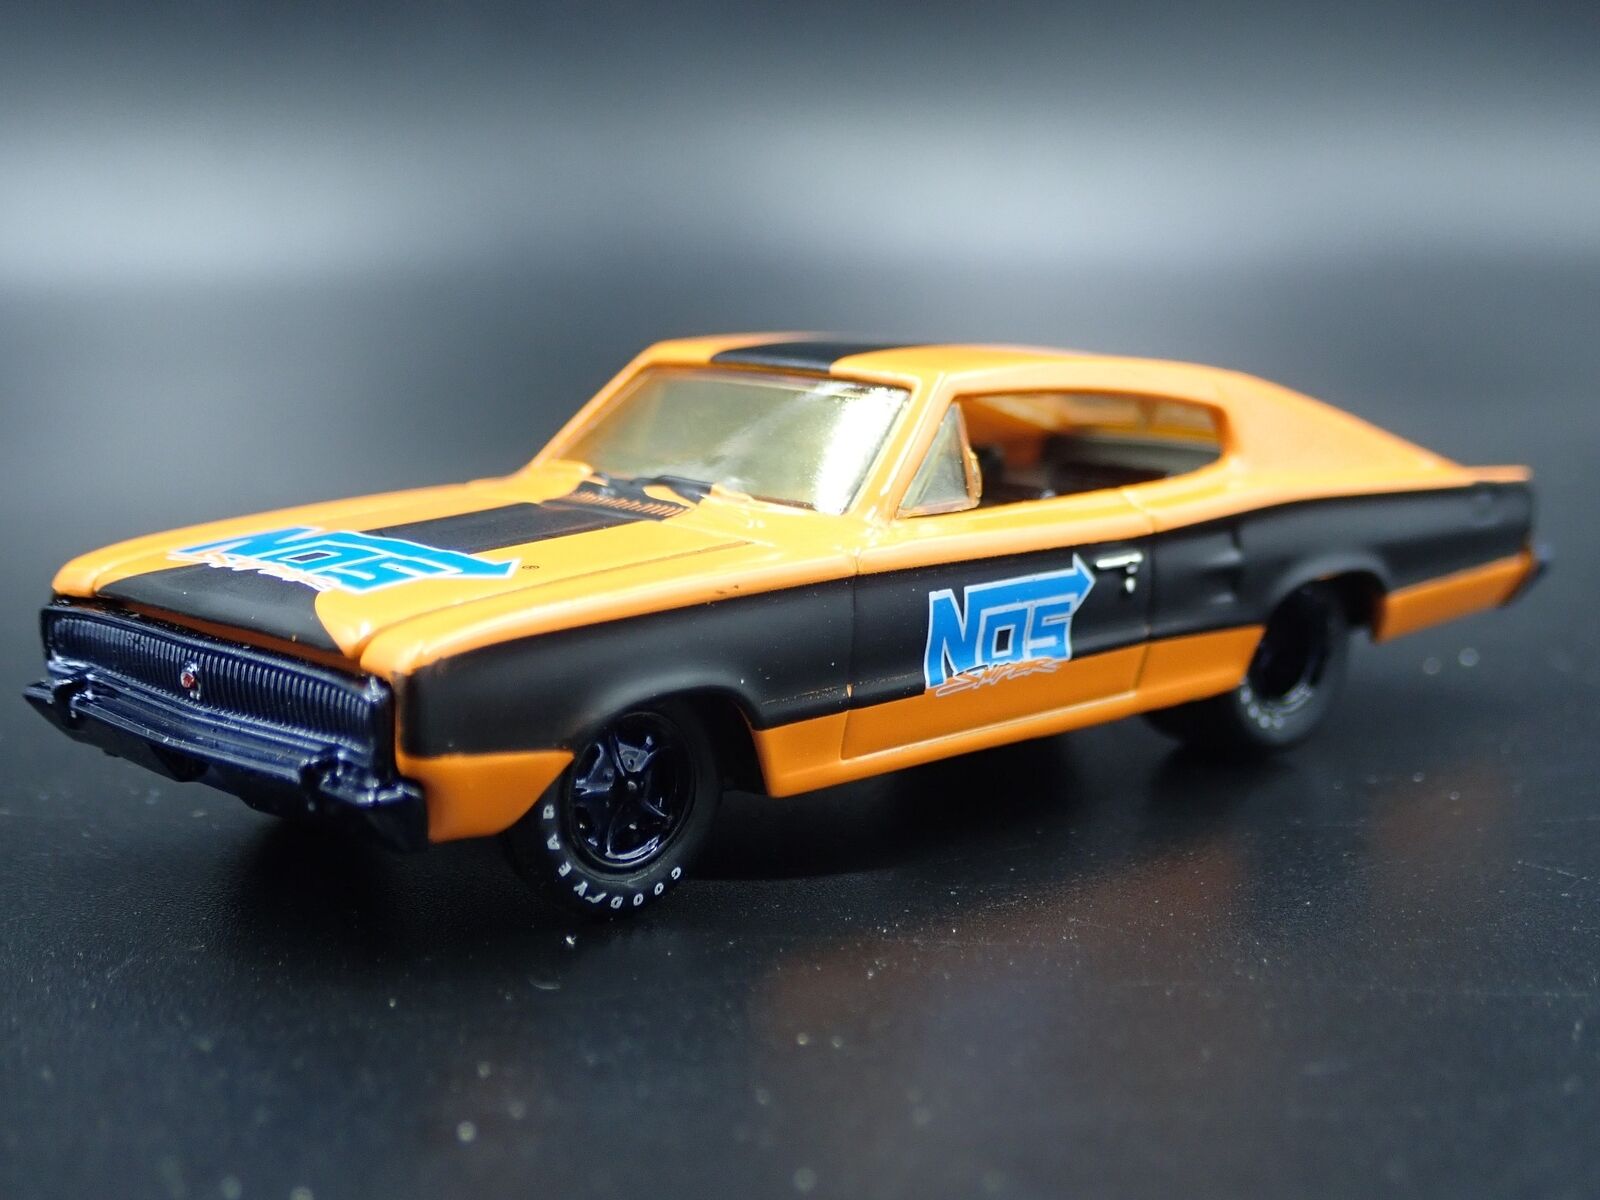 1966 66 DODGE CHARGER HEMI NOS RARE 1:64 SCALE COLLECTIBLE DIECAST relisted